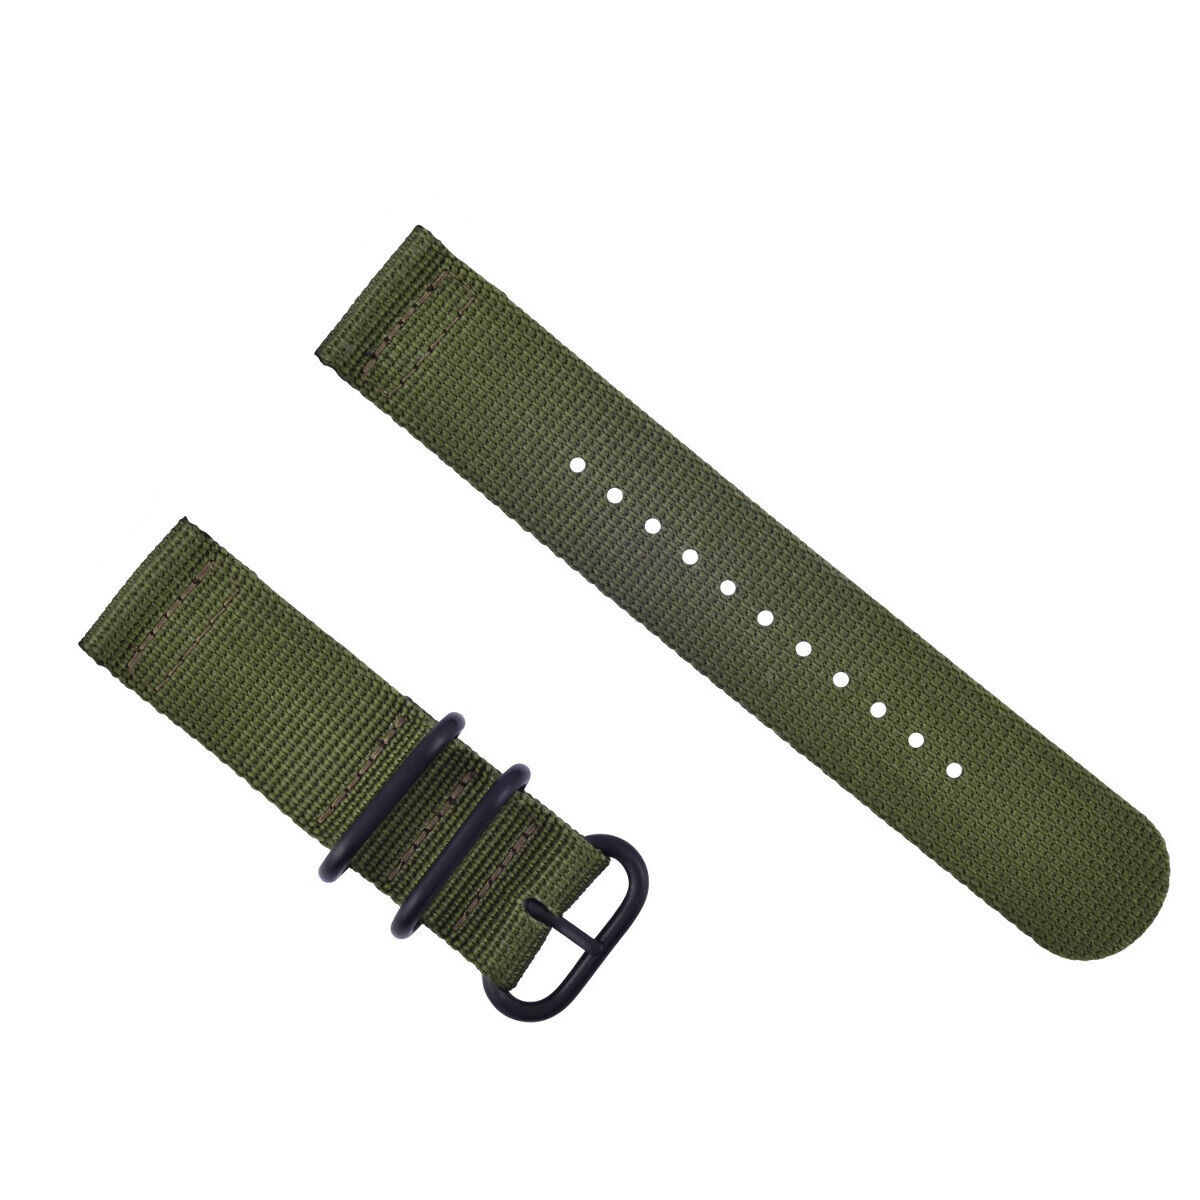 NEW FOR SUUNTO CORE NYLON DIVER WATCH BAND LUGS SET BLACK 3 PVD RINGS ARMY GREEN